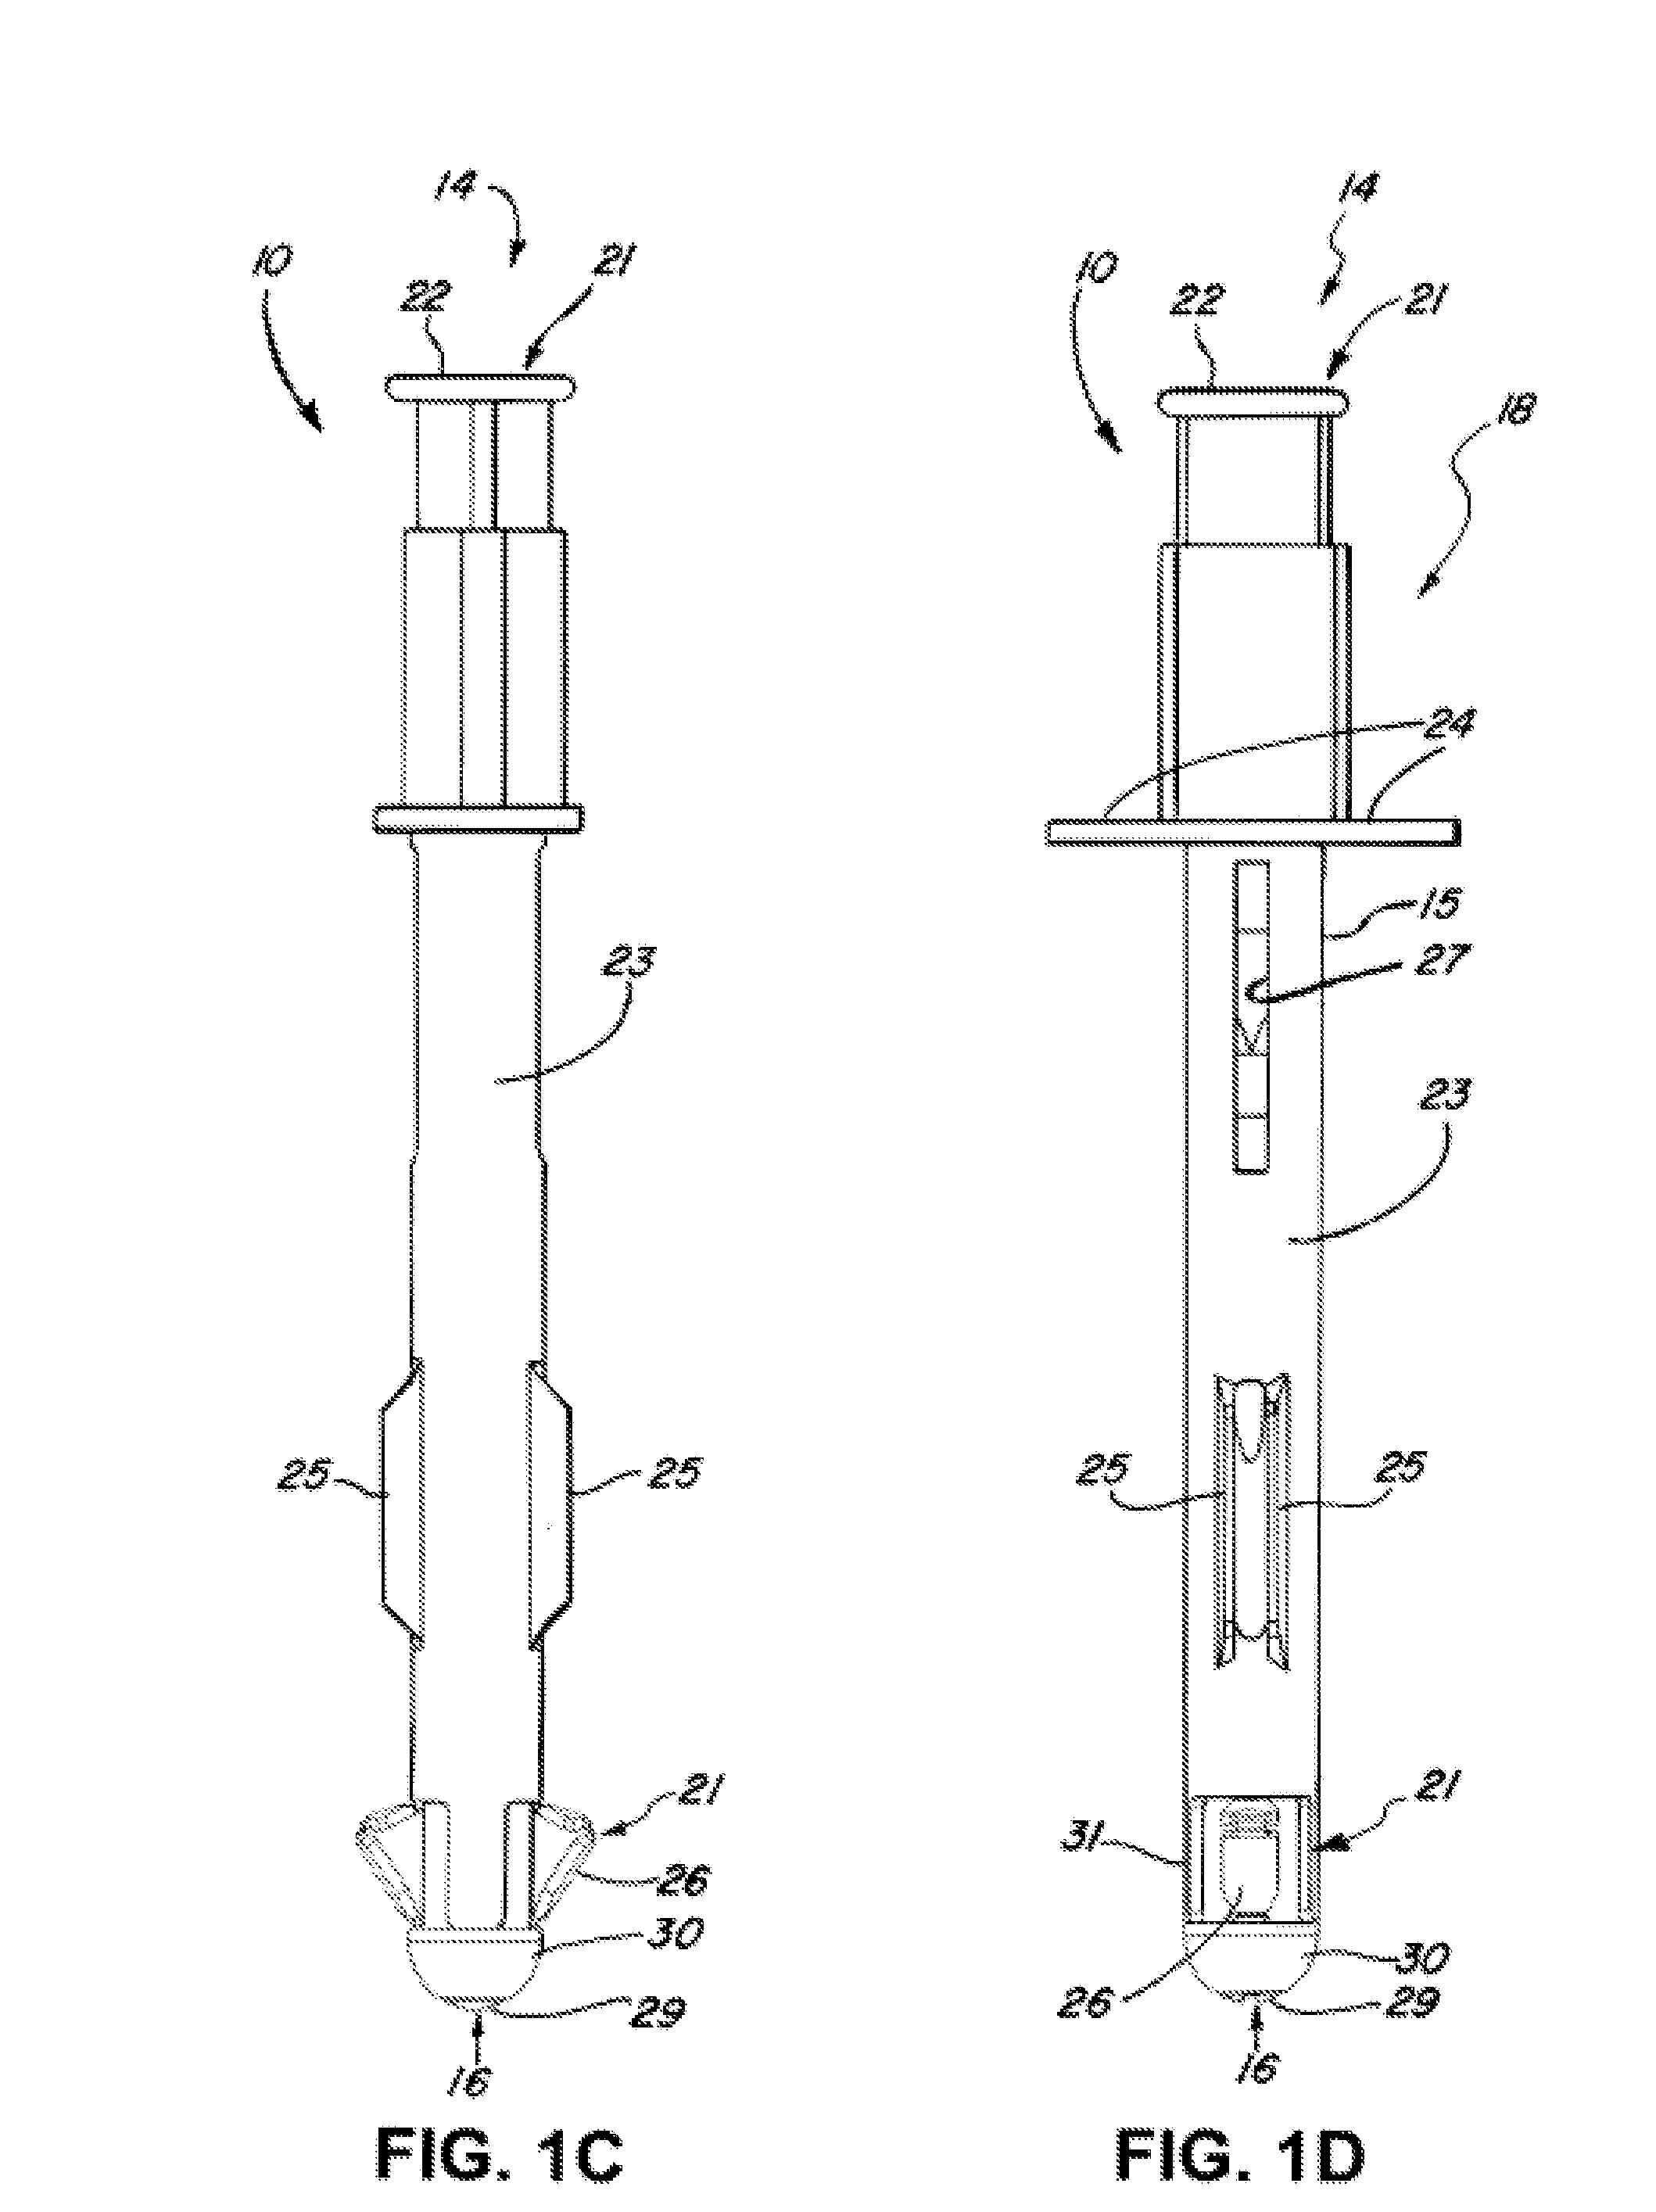 Dual insufflation and wound closure devices and methods